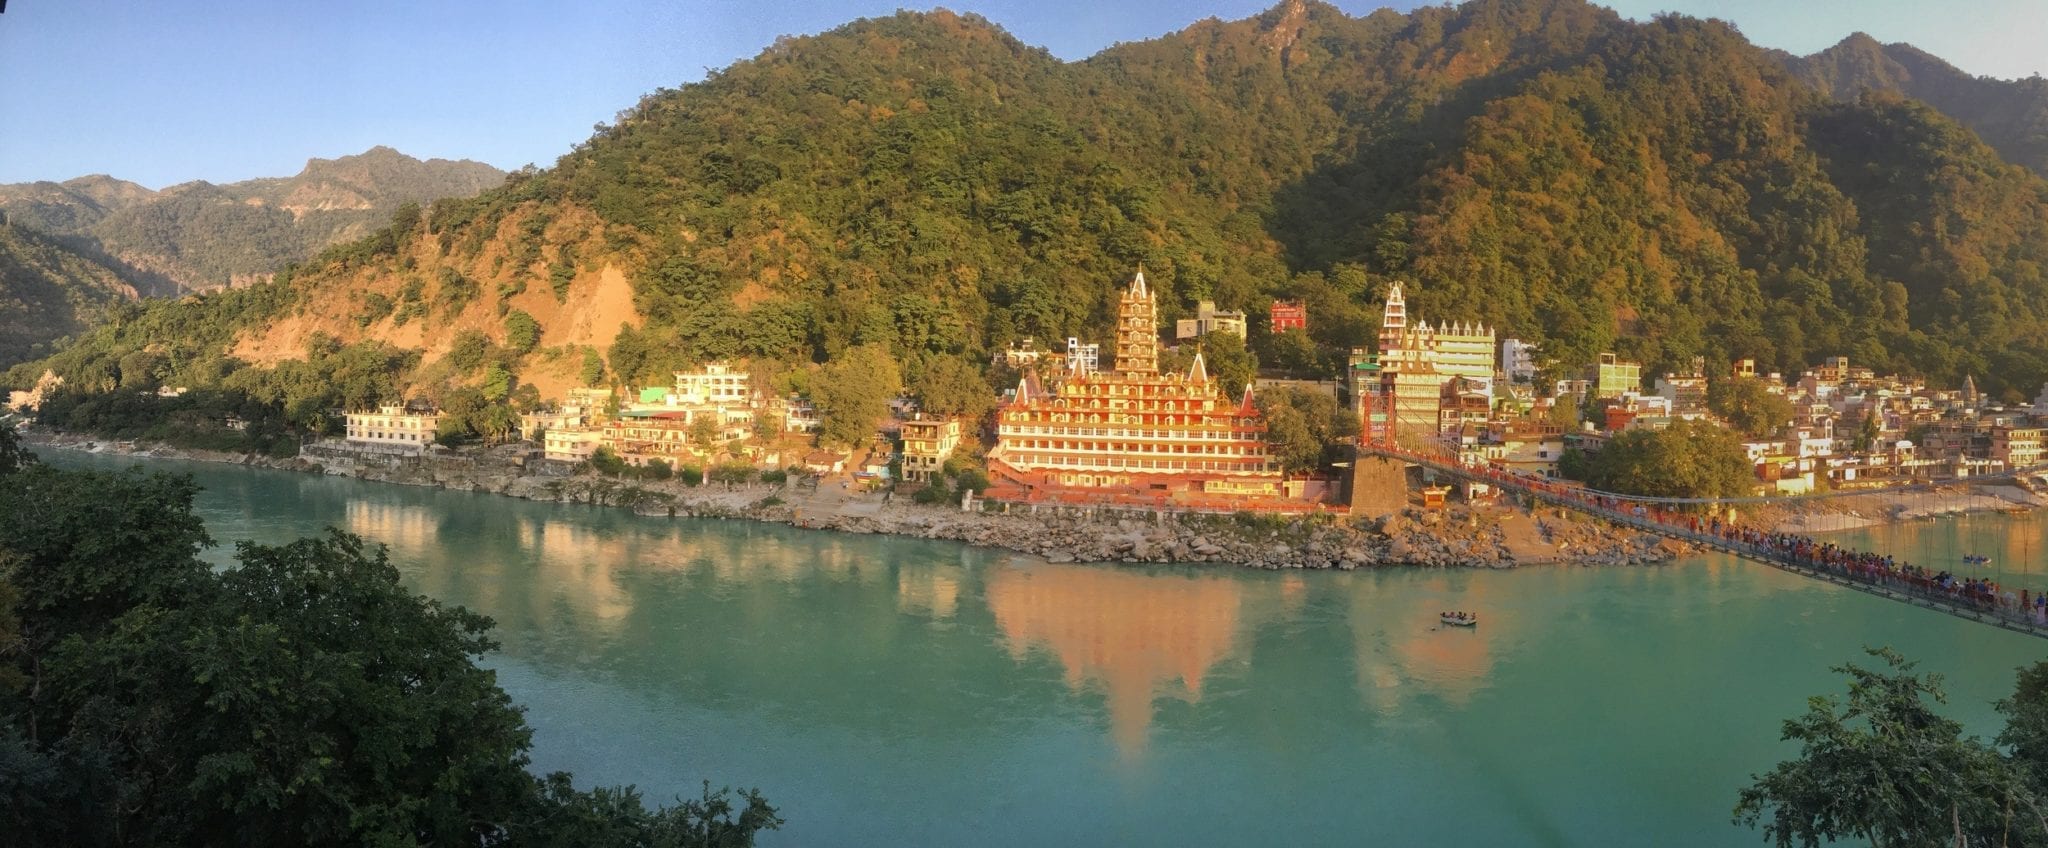 Orange temples nestled into green hills on a turquoise lake in Rishikesh, India.